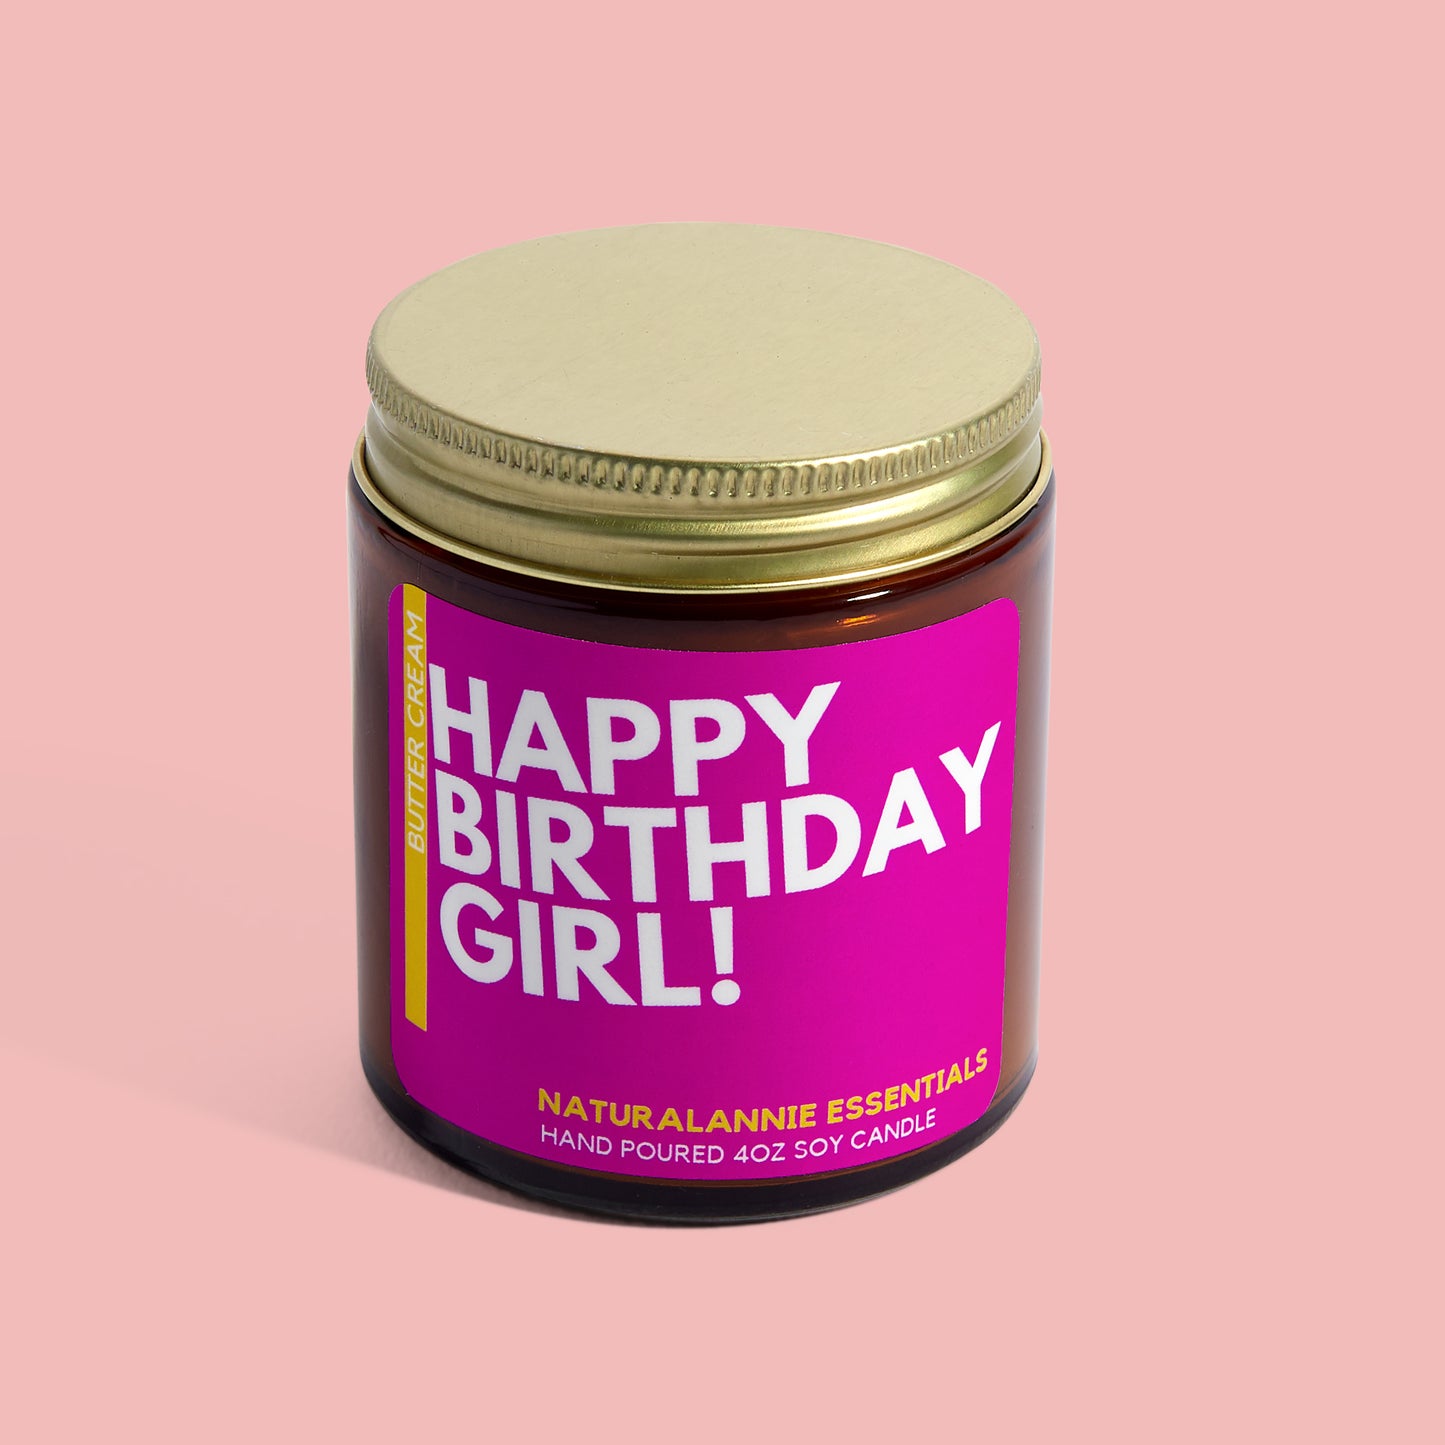 Happy Birthday Girl! Buttercream Soy Candle